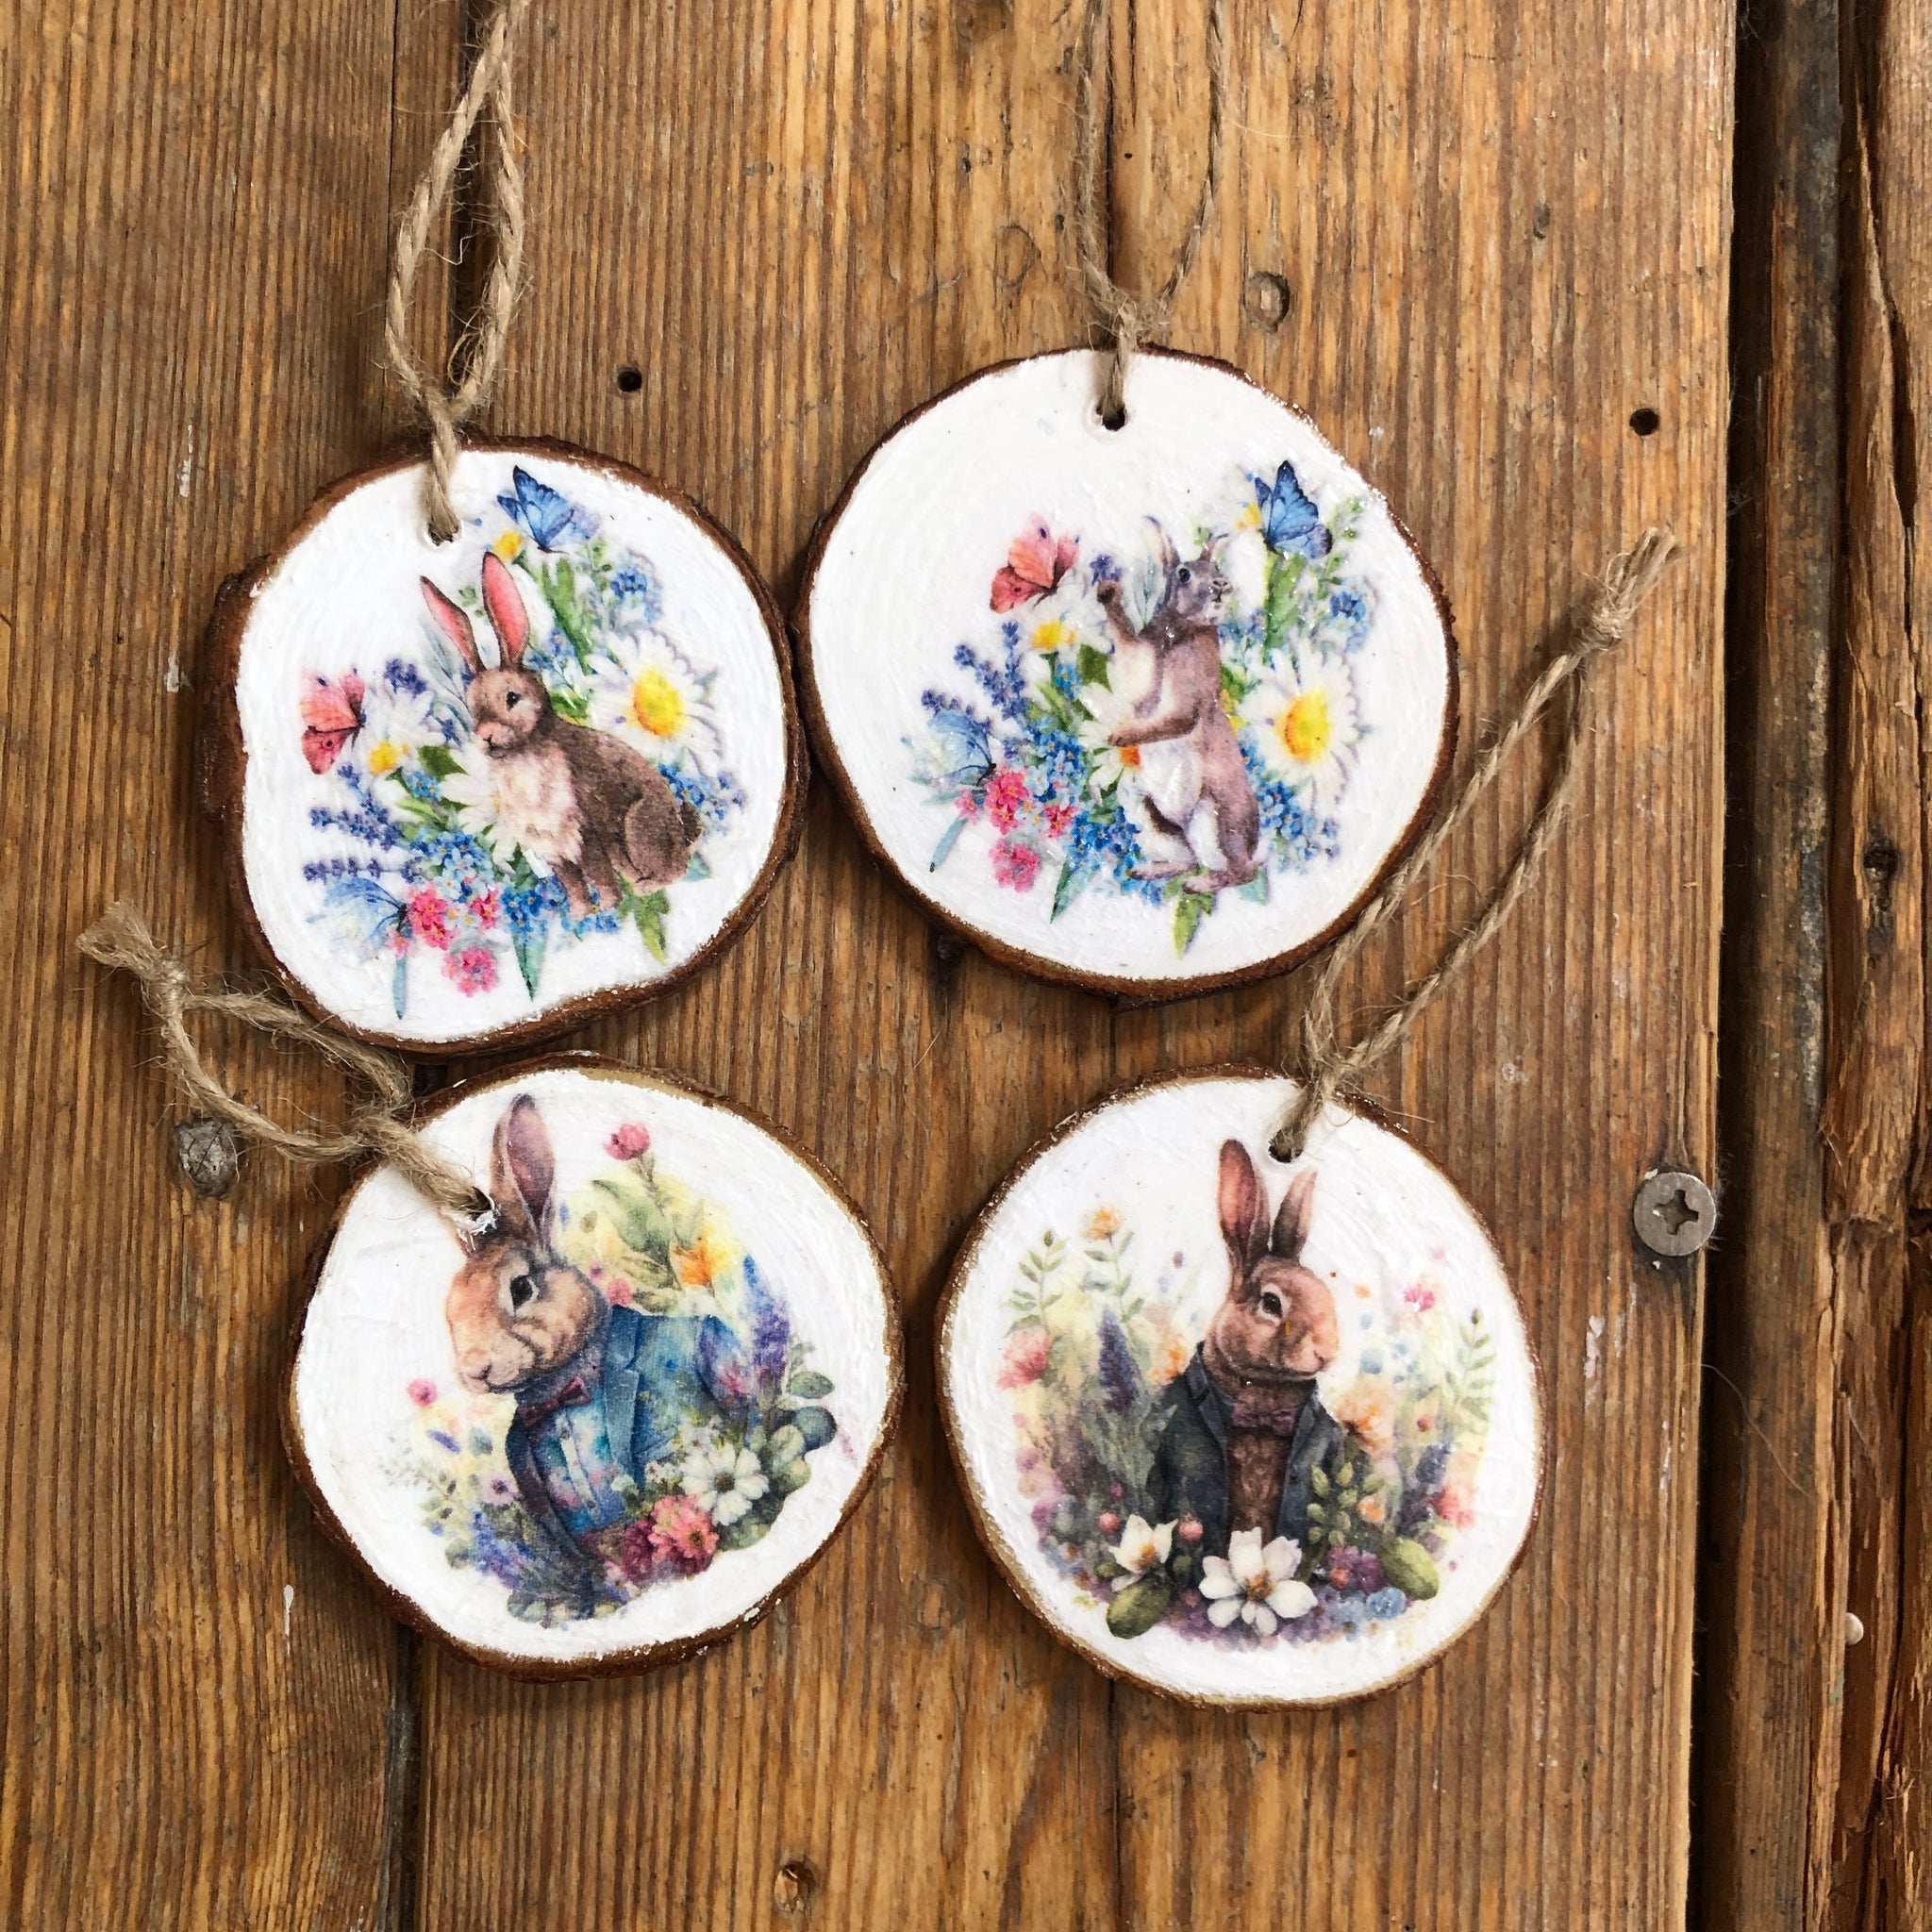 Cottage-core Rabbit Decorations on Natural Wood Slices